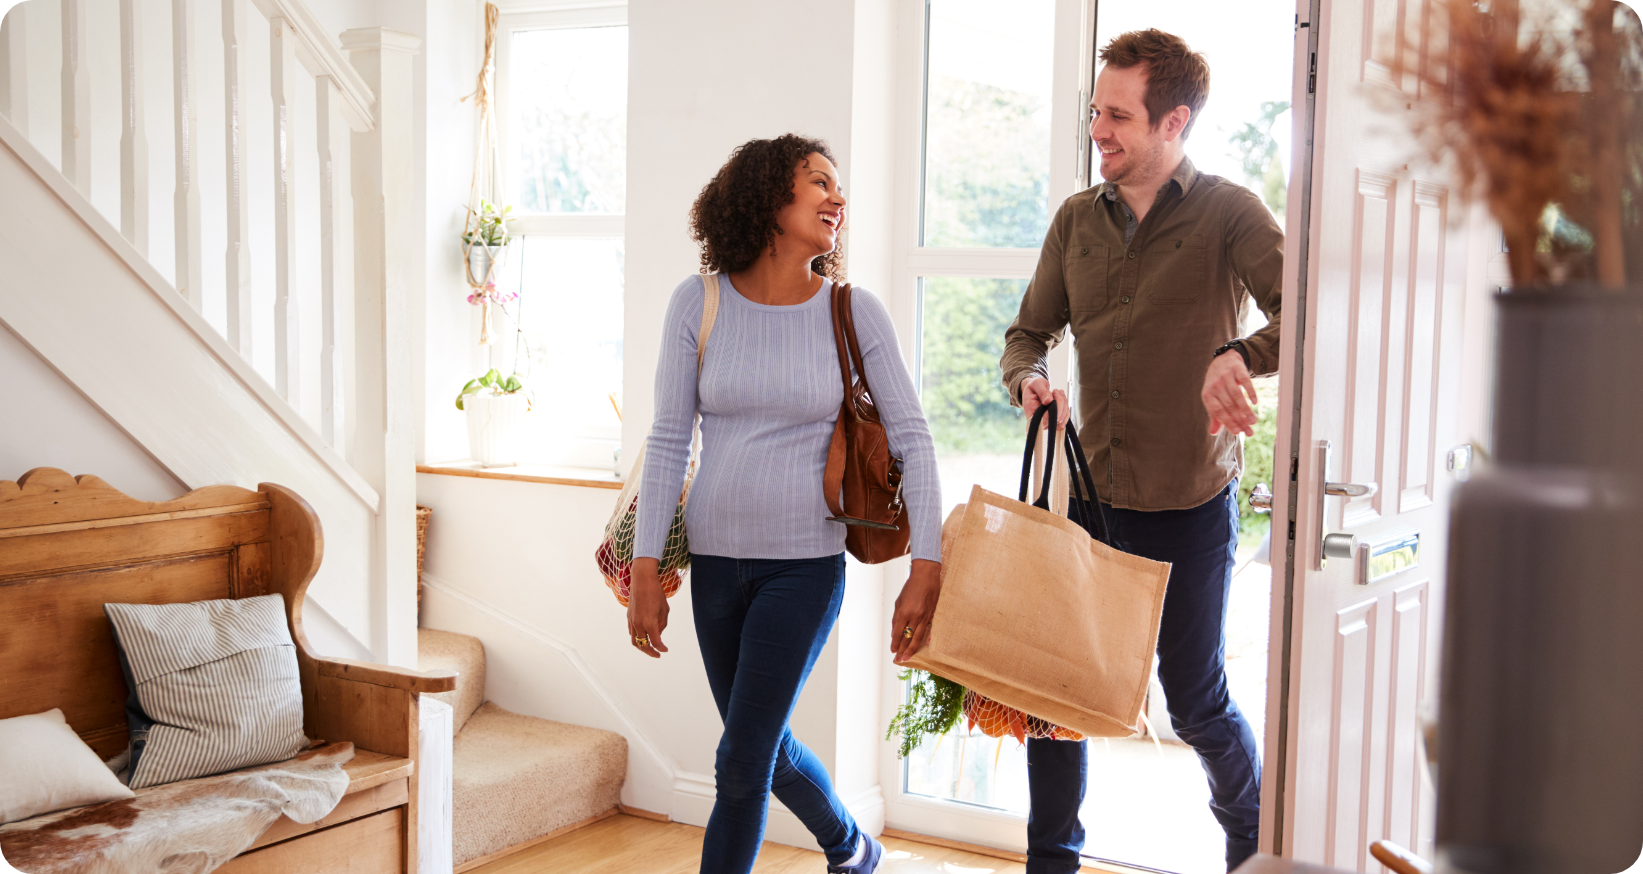 A man and a woman return home with shopping